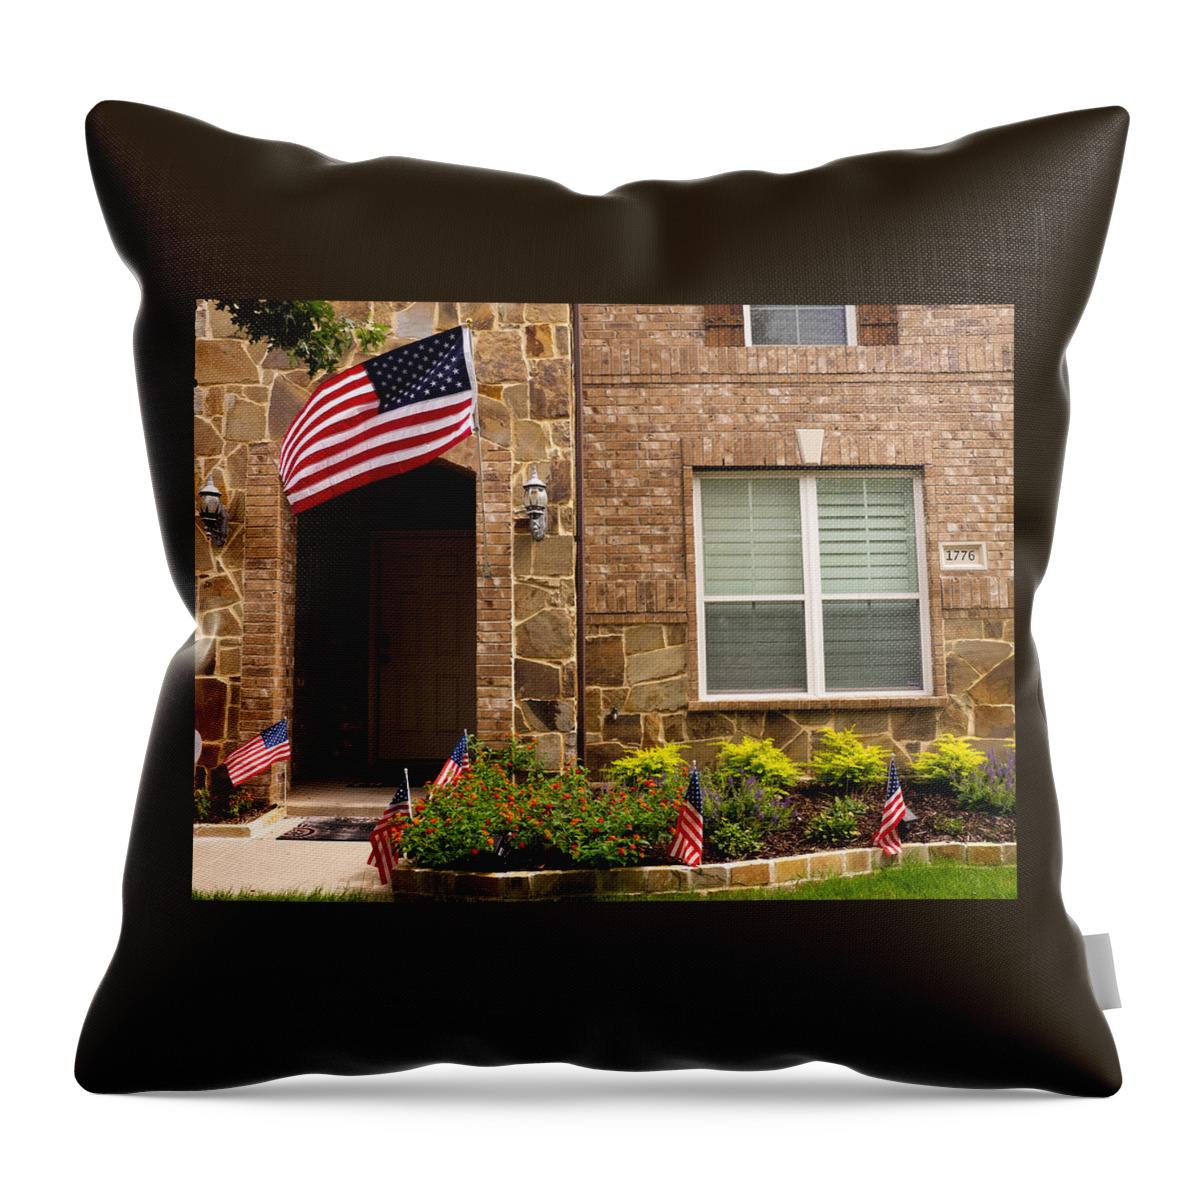 Flag Throw Pillow featuring the photograph July 4th Any Year by C Winslow Shafer